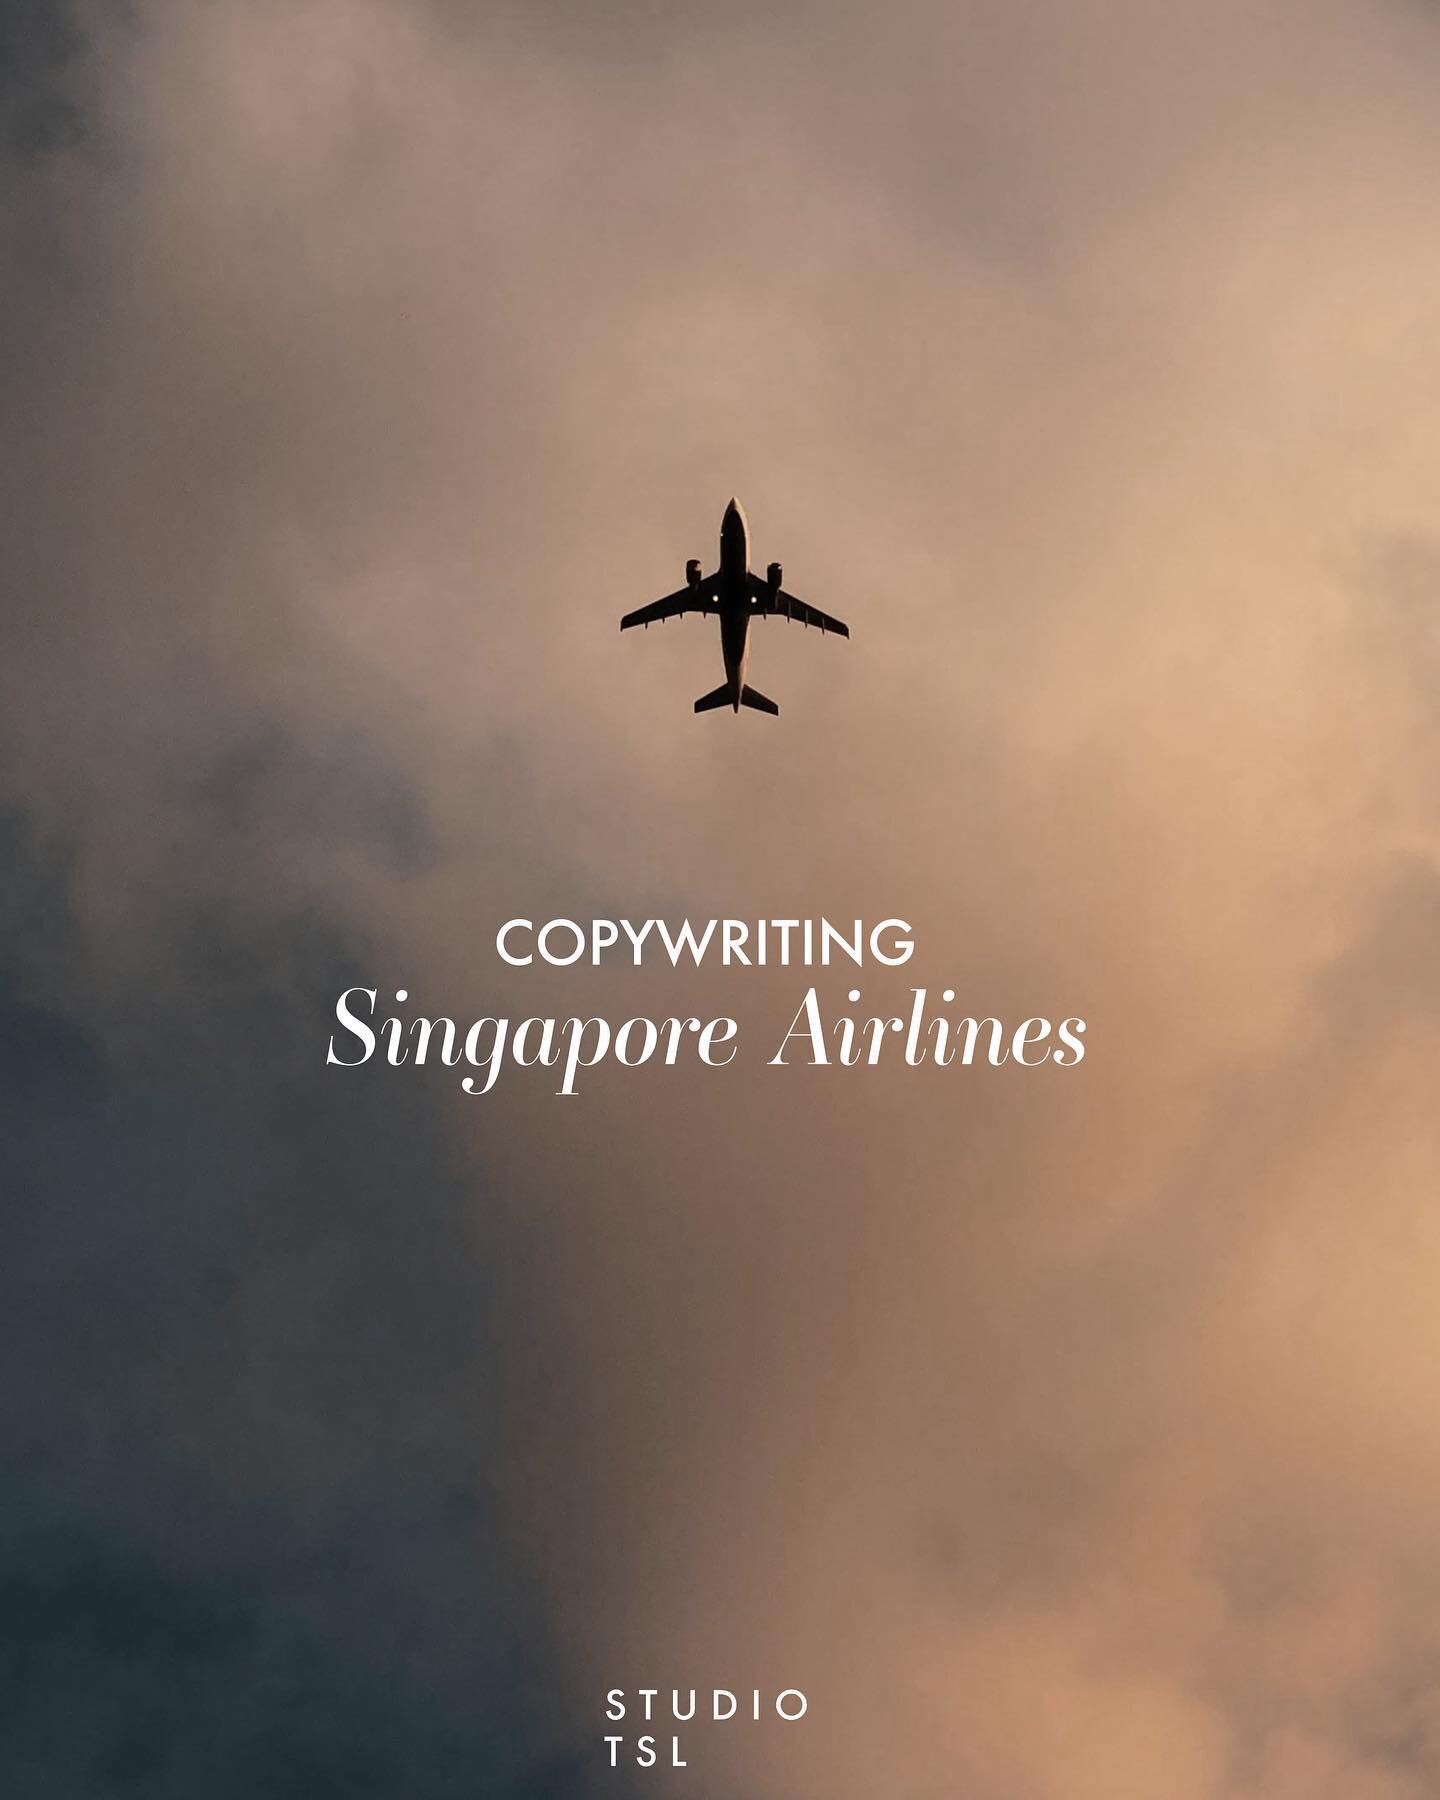 With 38k campaign views on YouTube, it was amazing to work on this creative script alongside @paradiselondon, marking Singapore Airline&rsquo;s new route between Singapore and Brussels. Swipe to watch ➝
.
.
.
.
.
.
.
#portfolio #copywriting #singapor